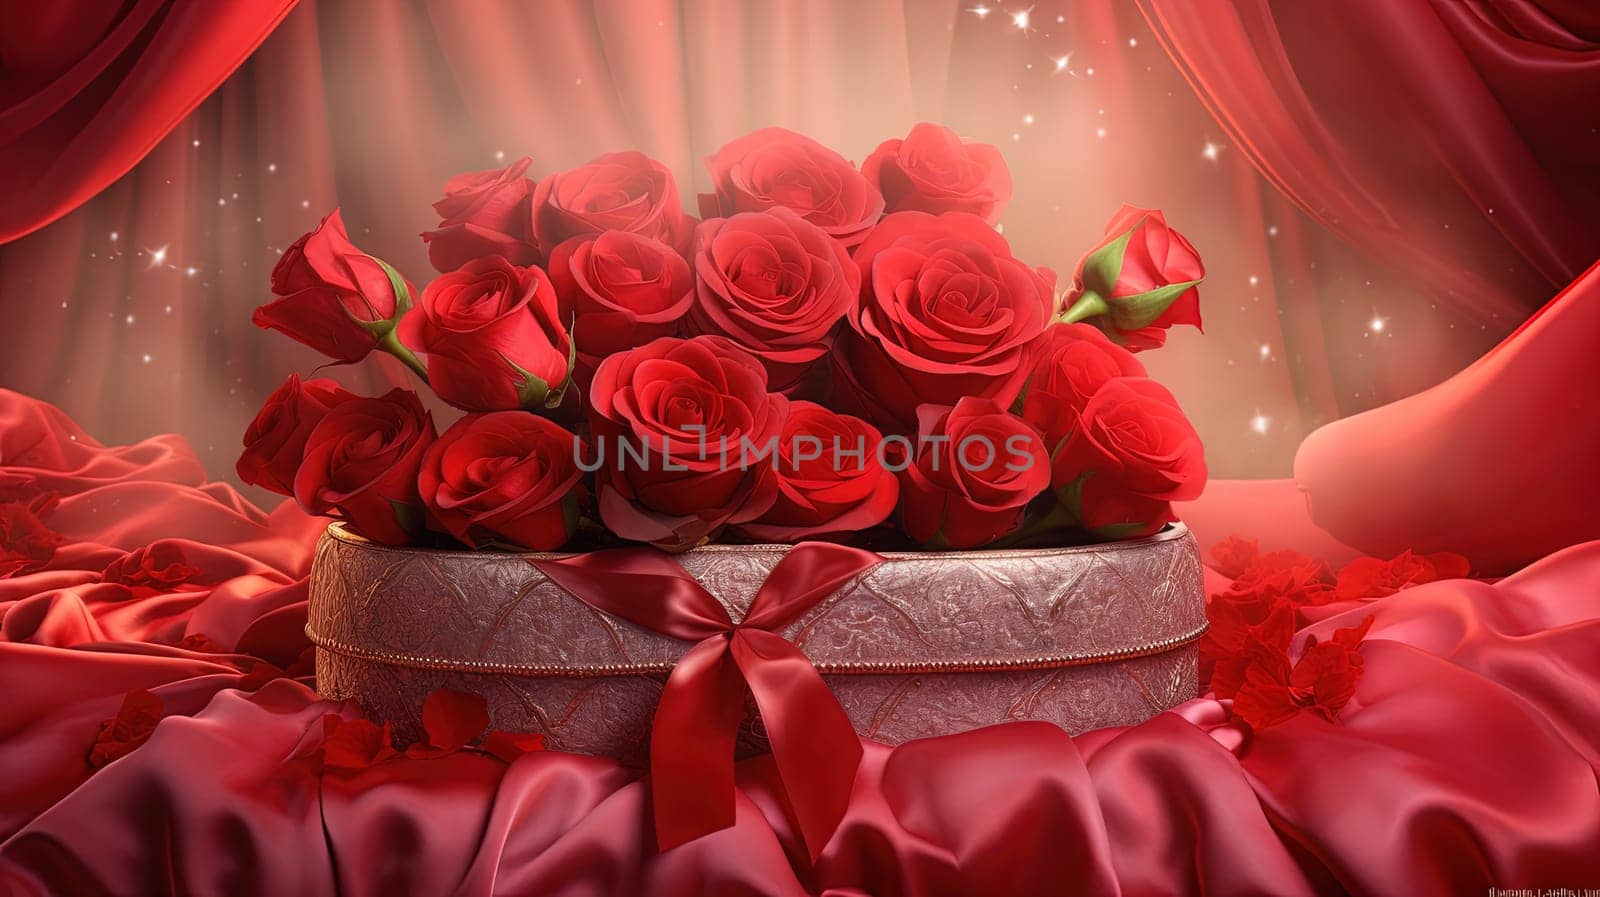 A luxurious gift box wrapped in vibrant red silk, nestled in a bed of velvety red roses, soft petals scattering around, creating an enchanting Valentine's Day ambiance by Kadula